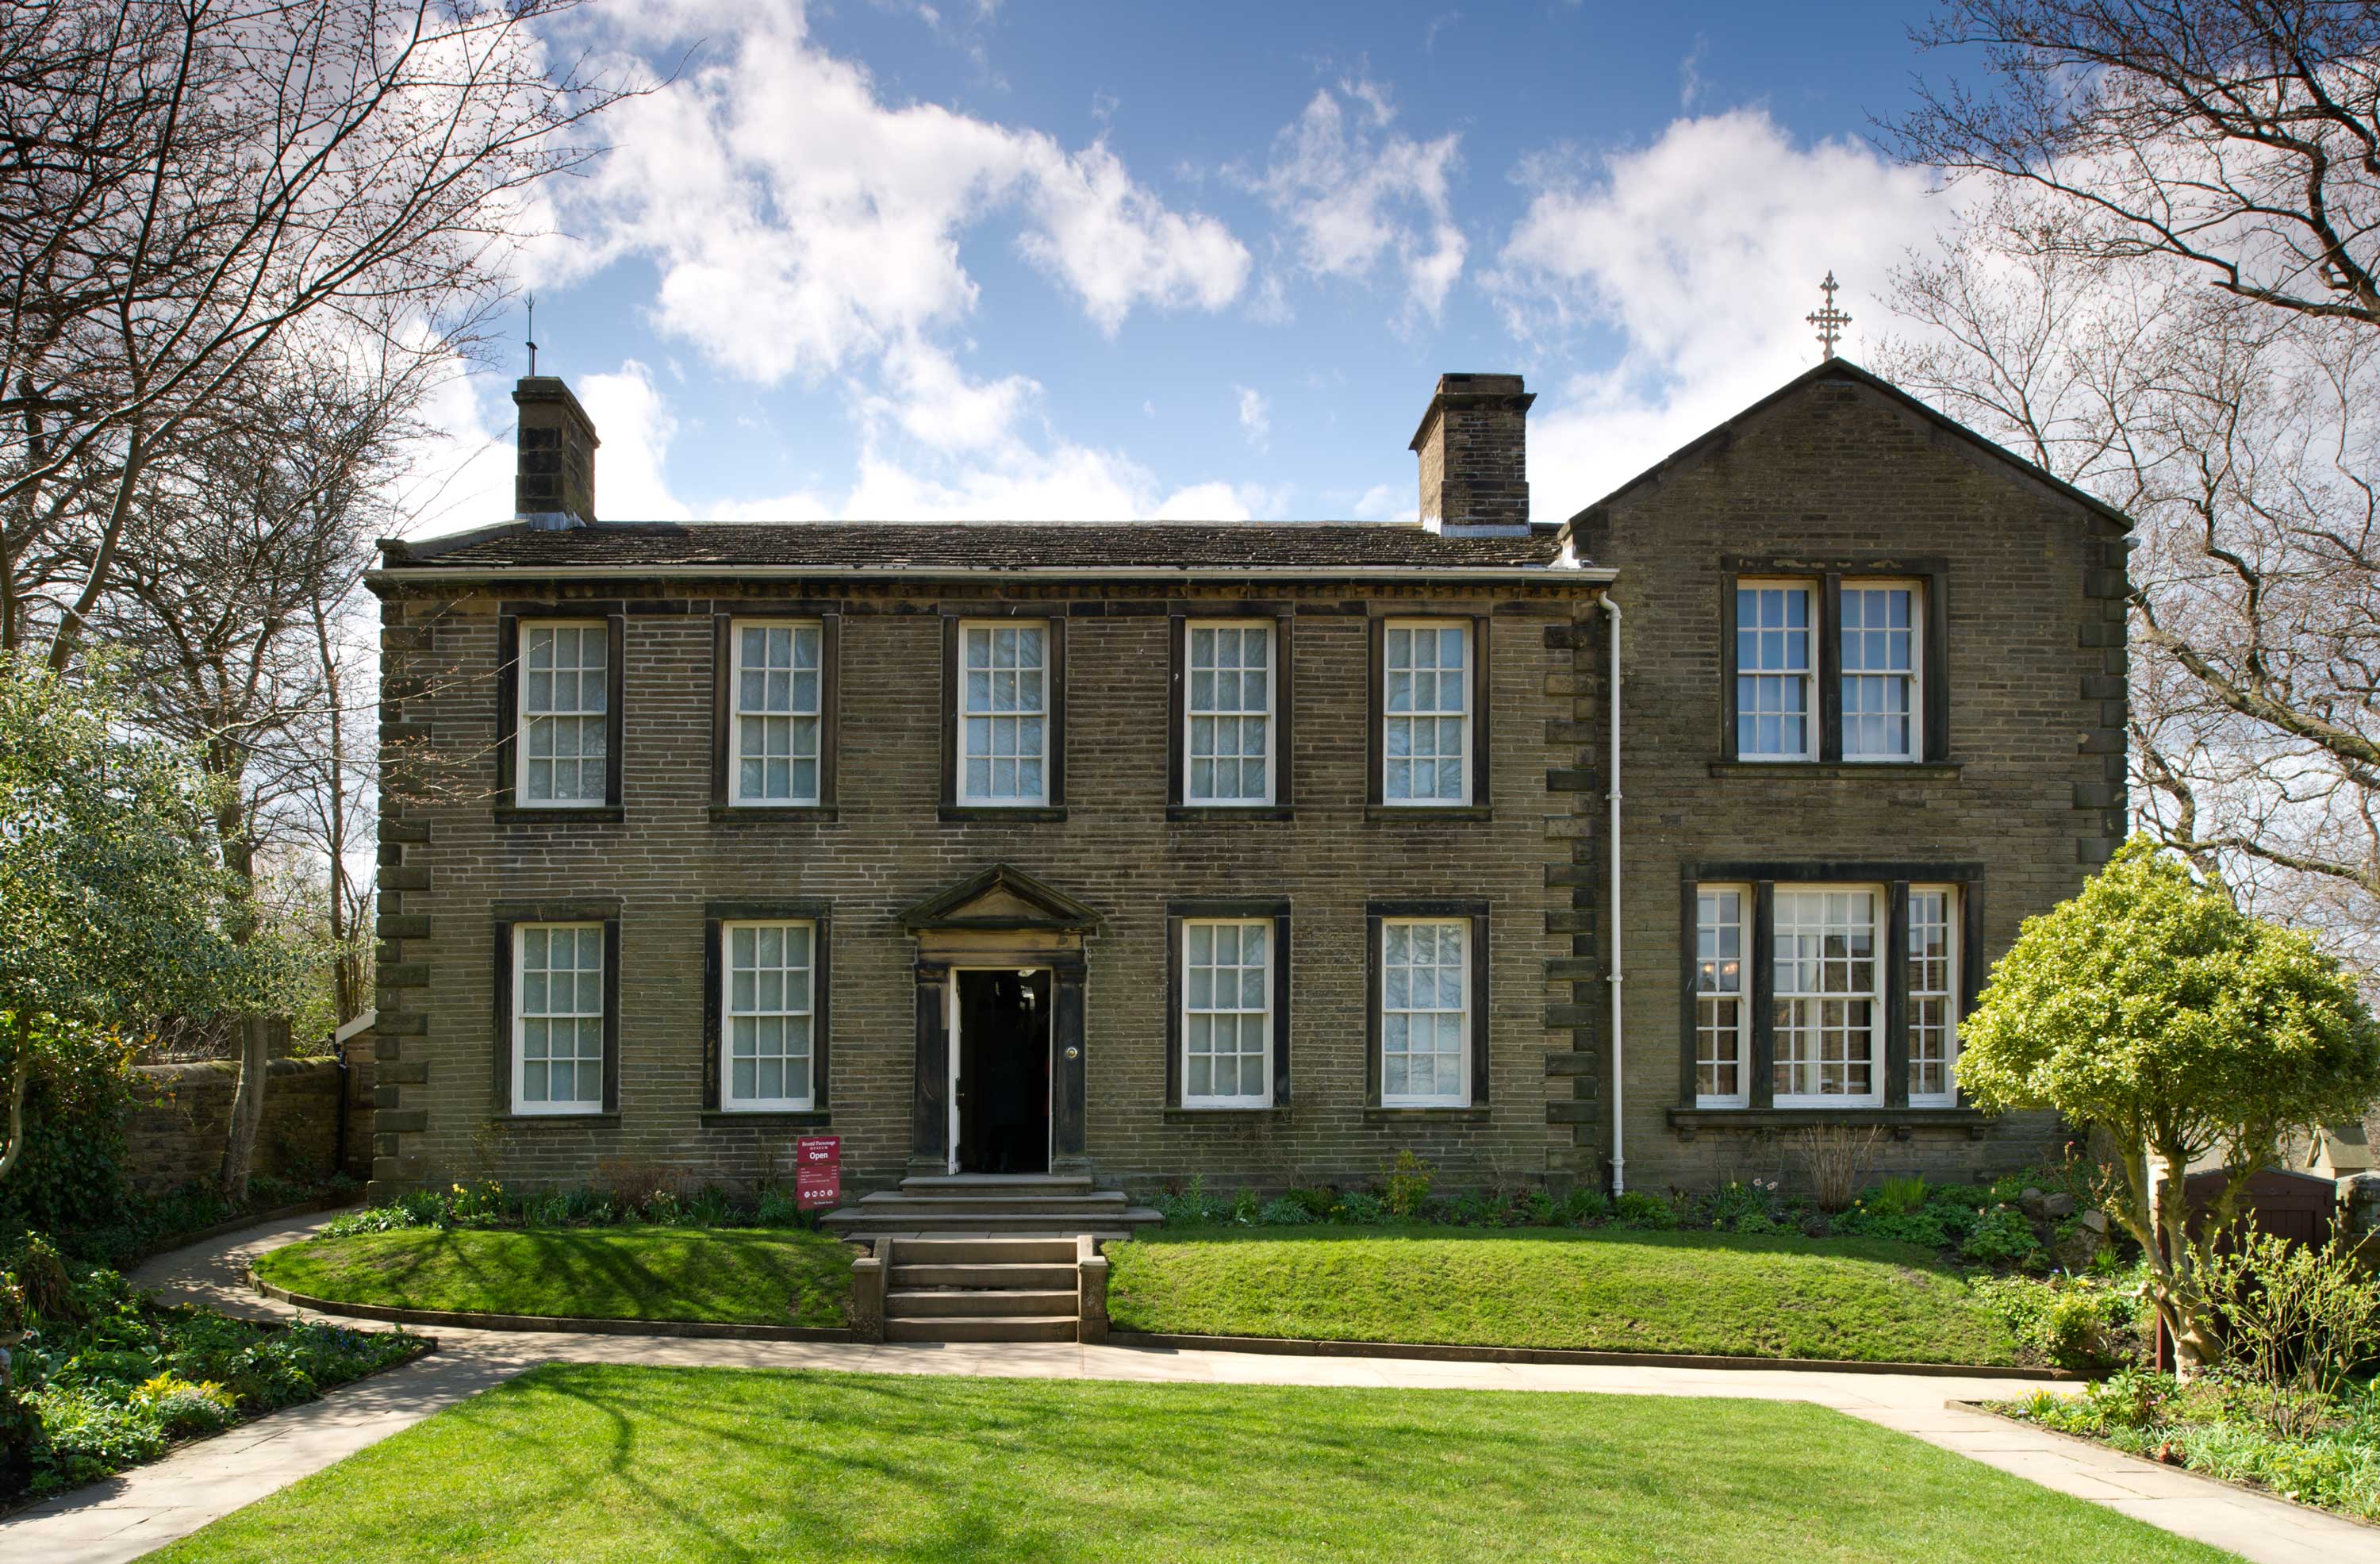 Image of the Brontë Parsonage in Haworth which was home to Patrick Brontë and his three literary daughters Charlotte, Emily and Anne from 1820 onwards.